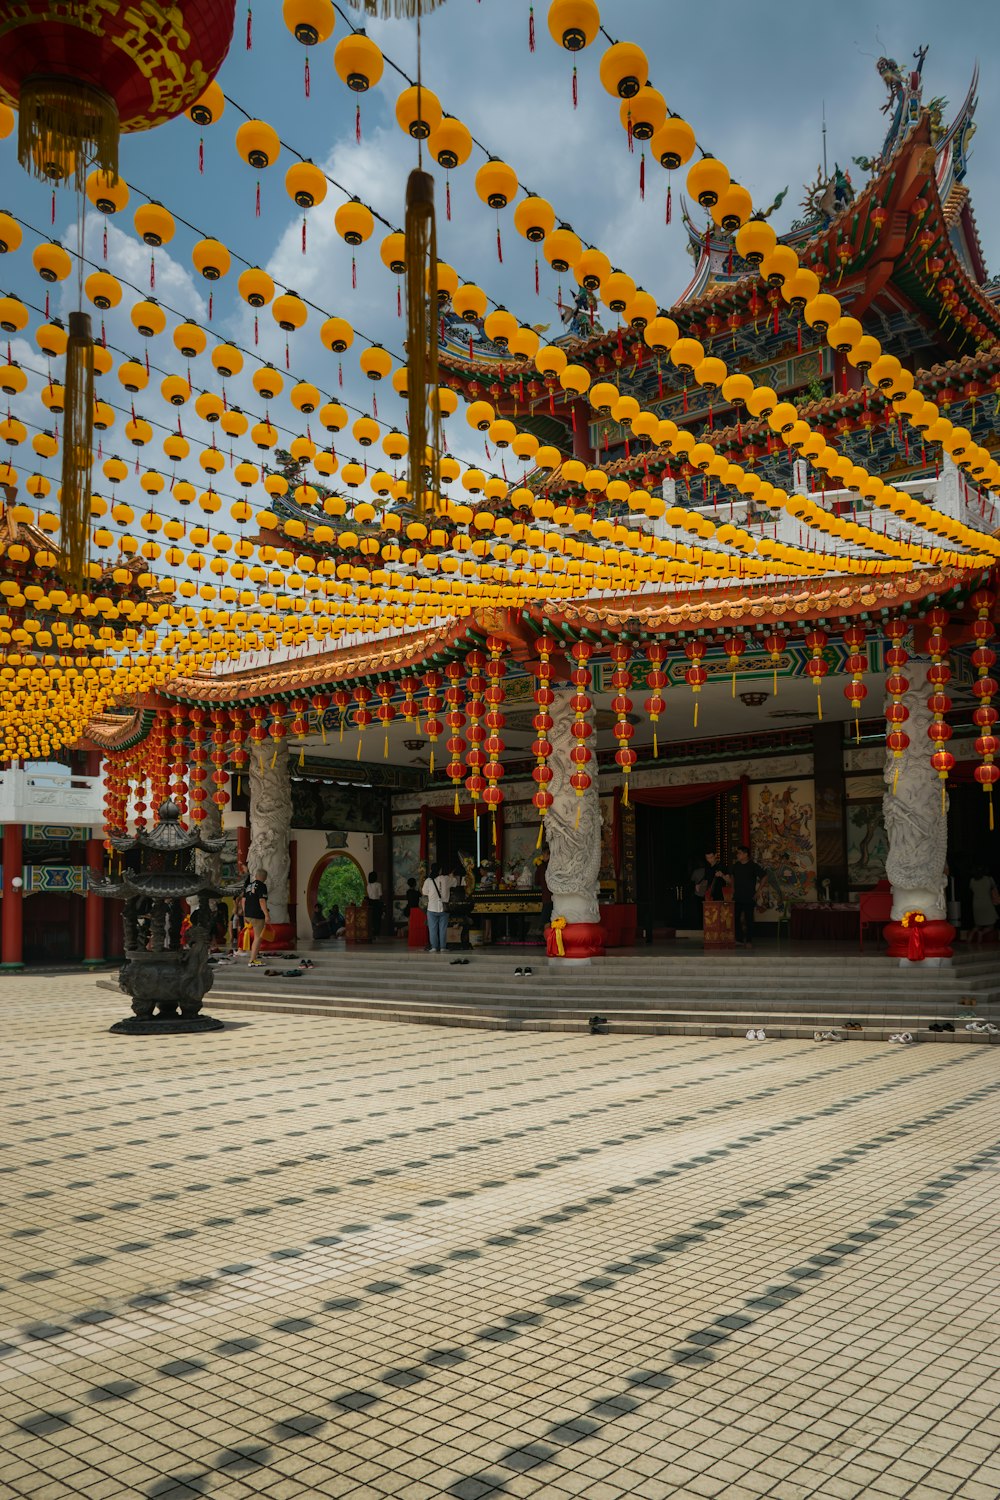 a group of yellow and red lanterns hanging from the ceiling